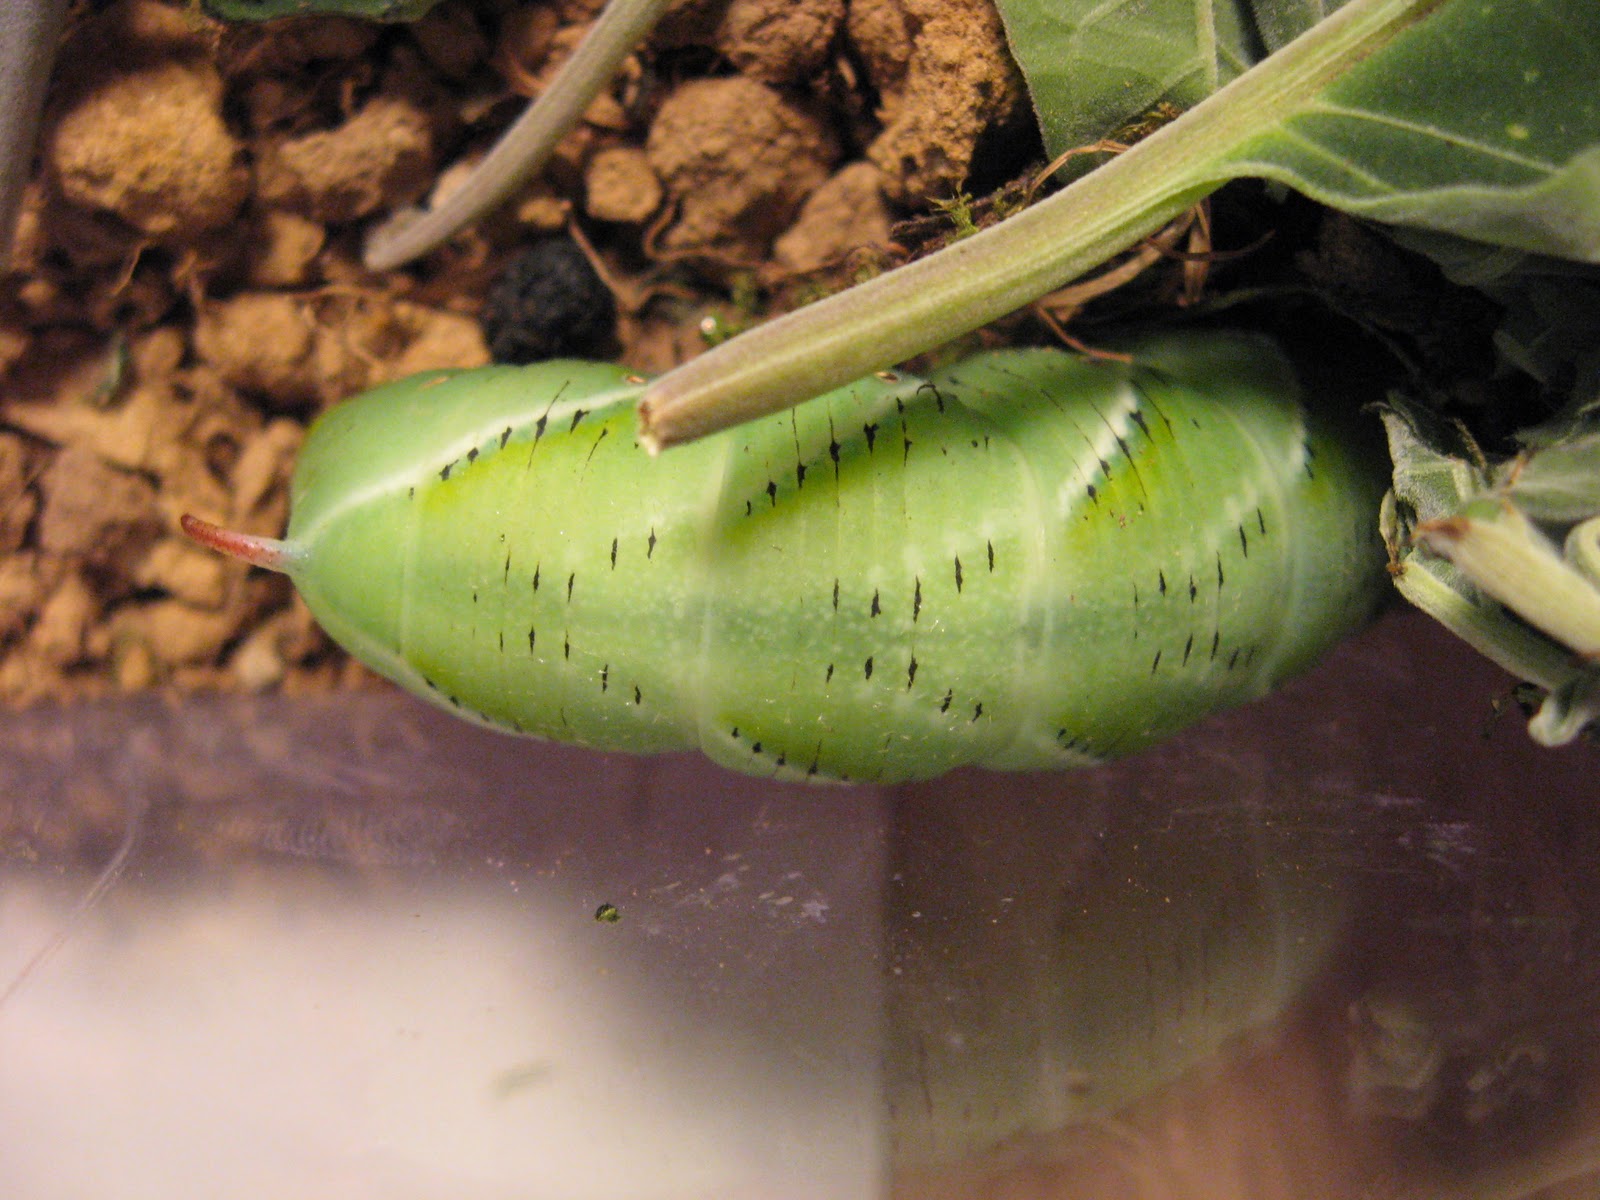 Will grow to about 2" Live Hornworms 1-4 pods 24-30 each pod up to 120 worms 